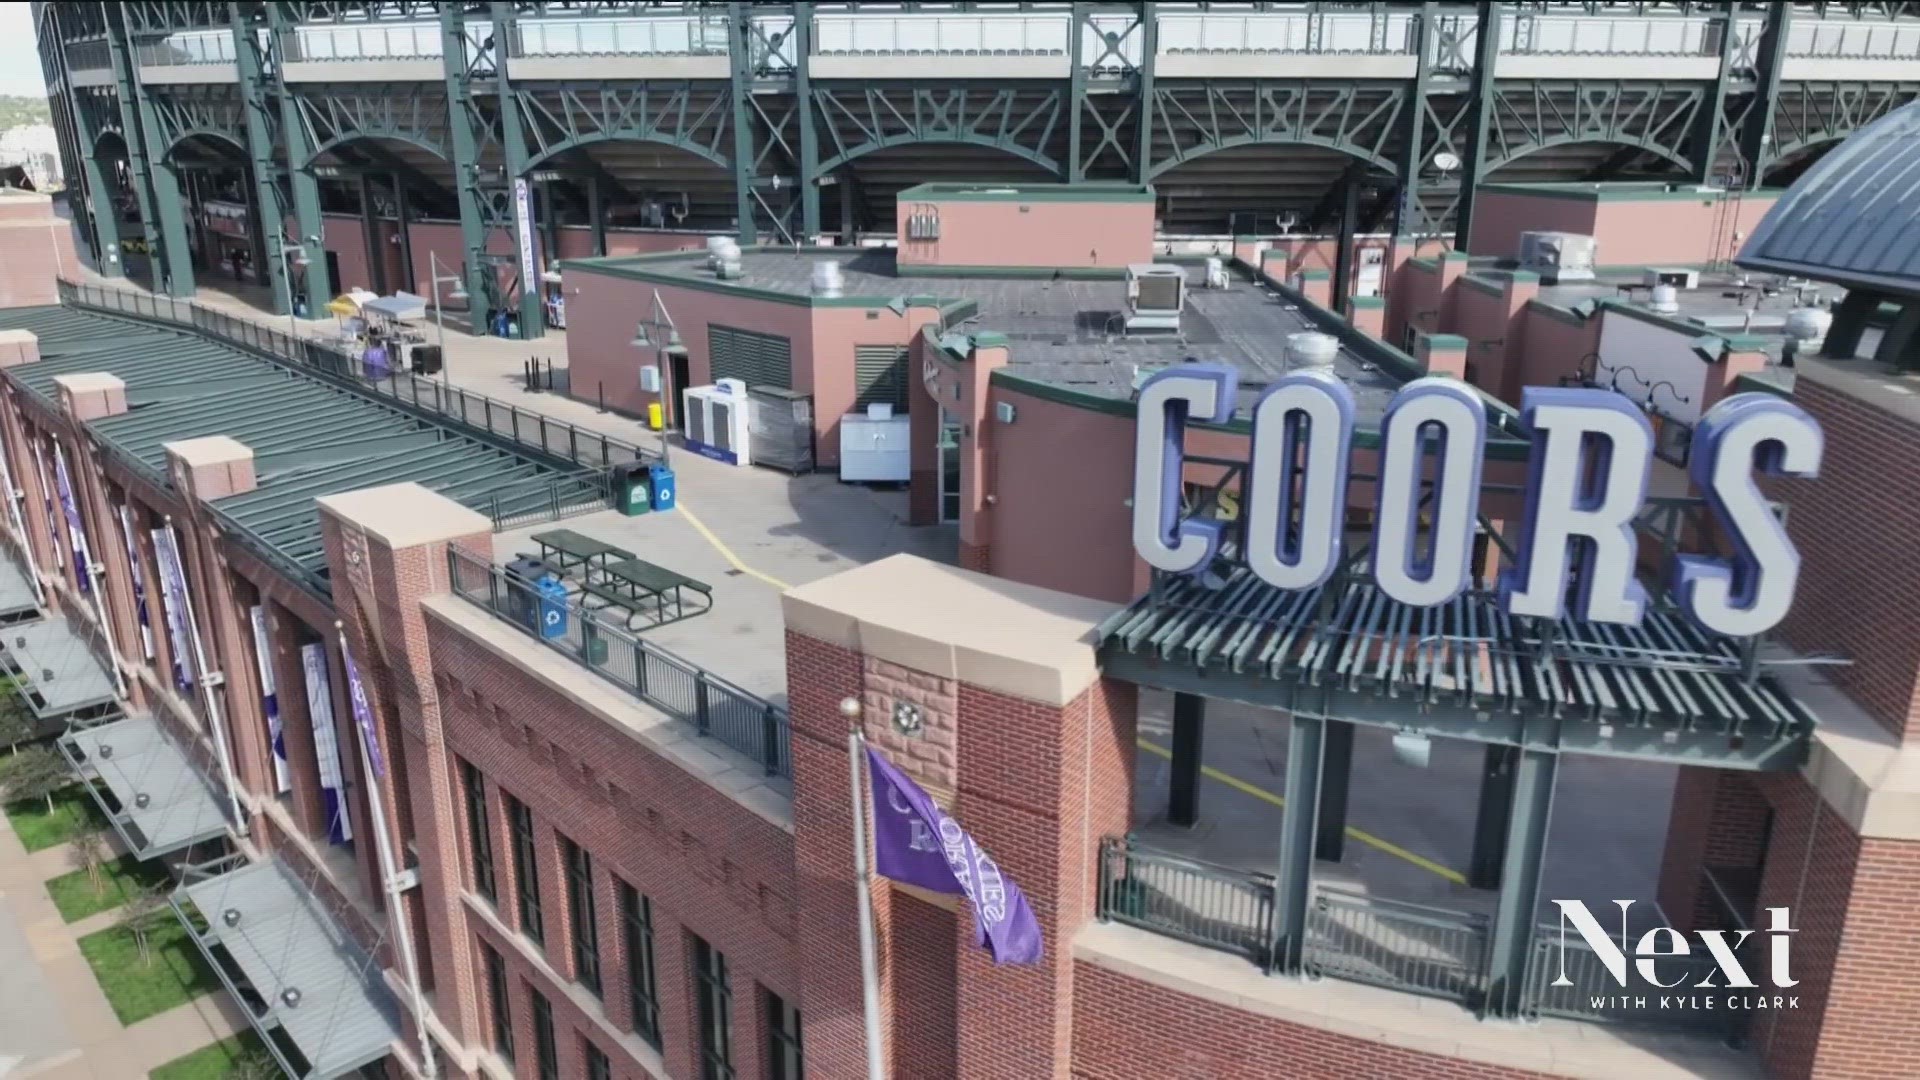 It's going to take more than a 100-loss season to clear out Coors Field.